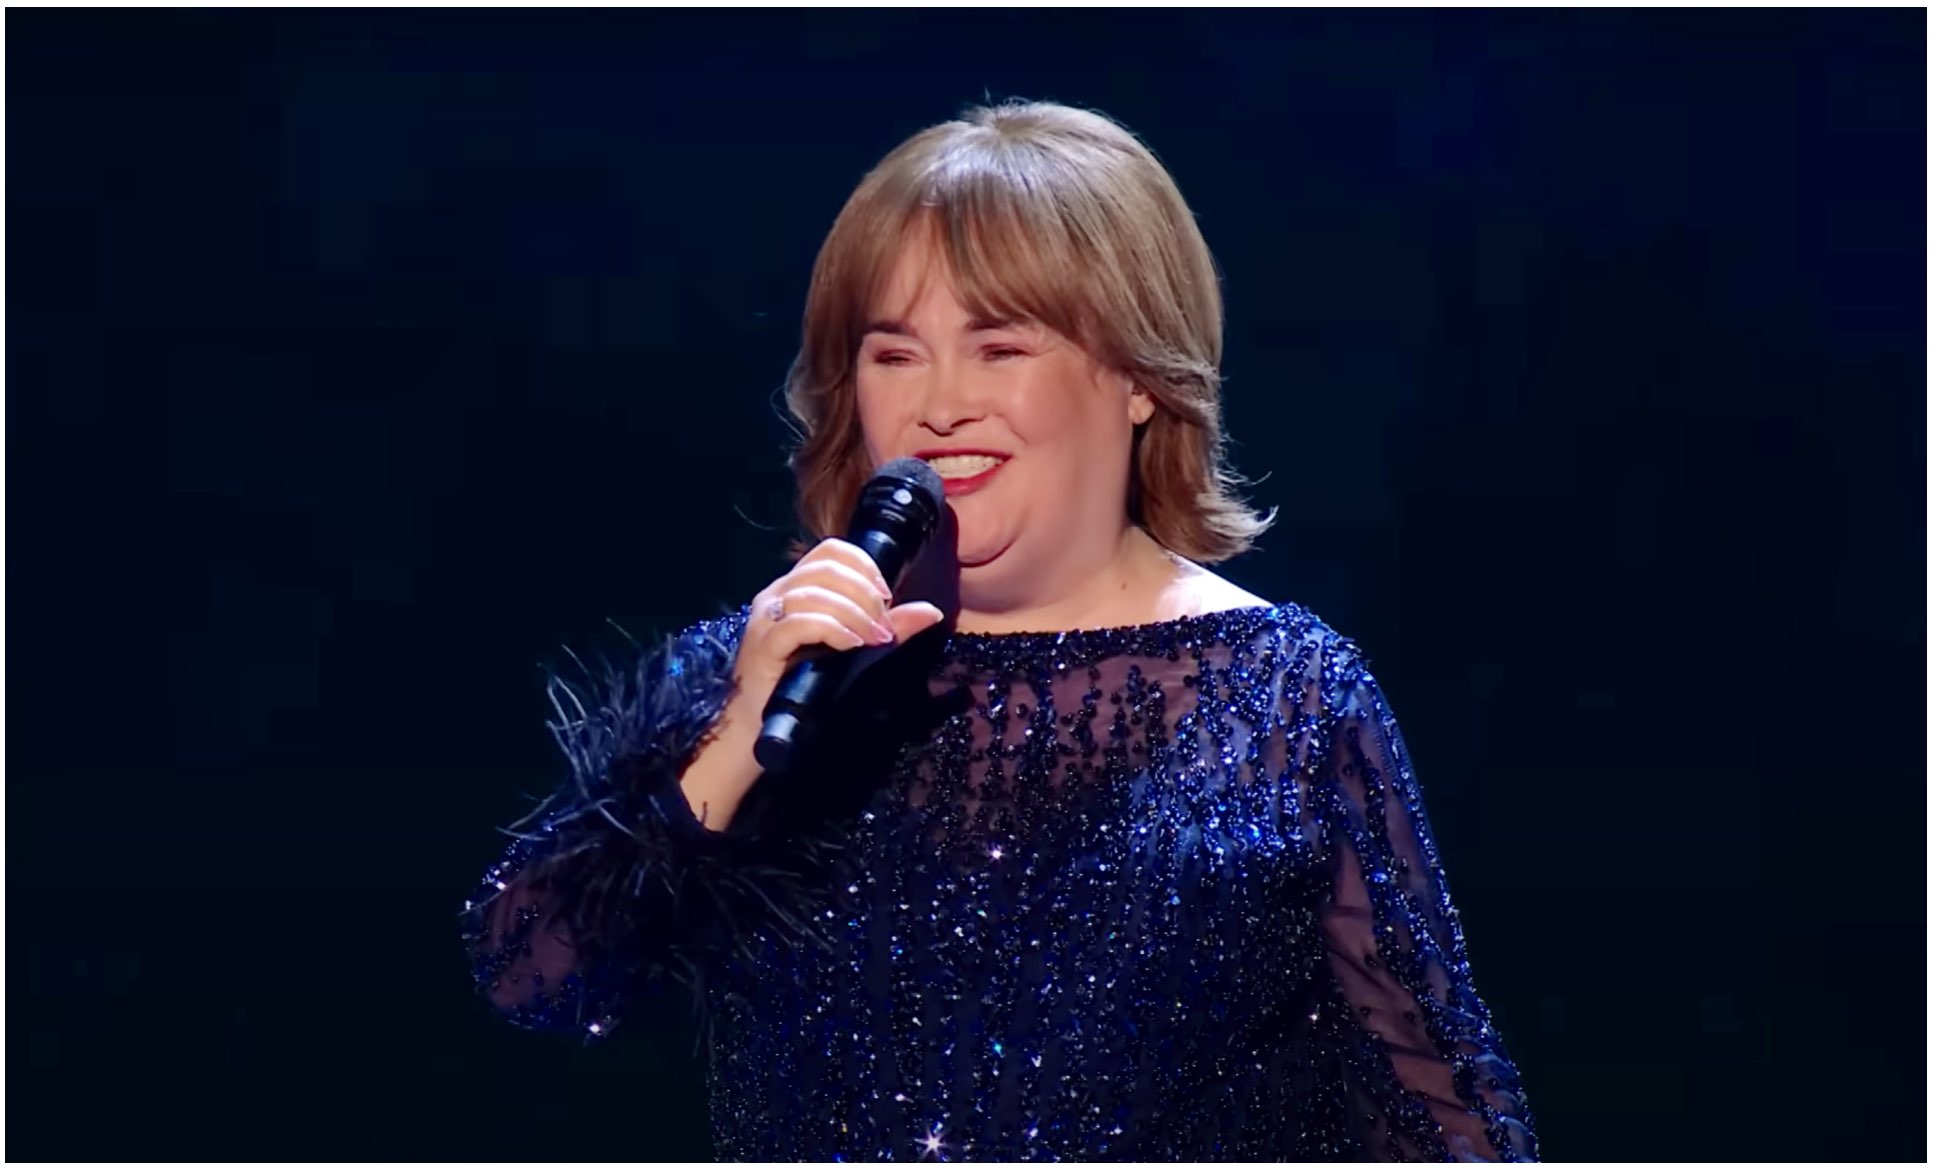 Susan Boyle sang "I Dreamed of Dream" after returning to the stage at Britain's Got Talent.